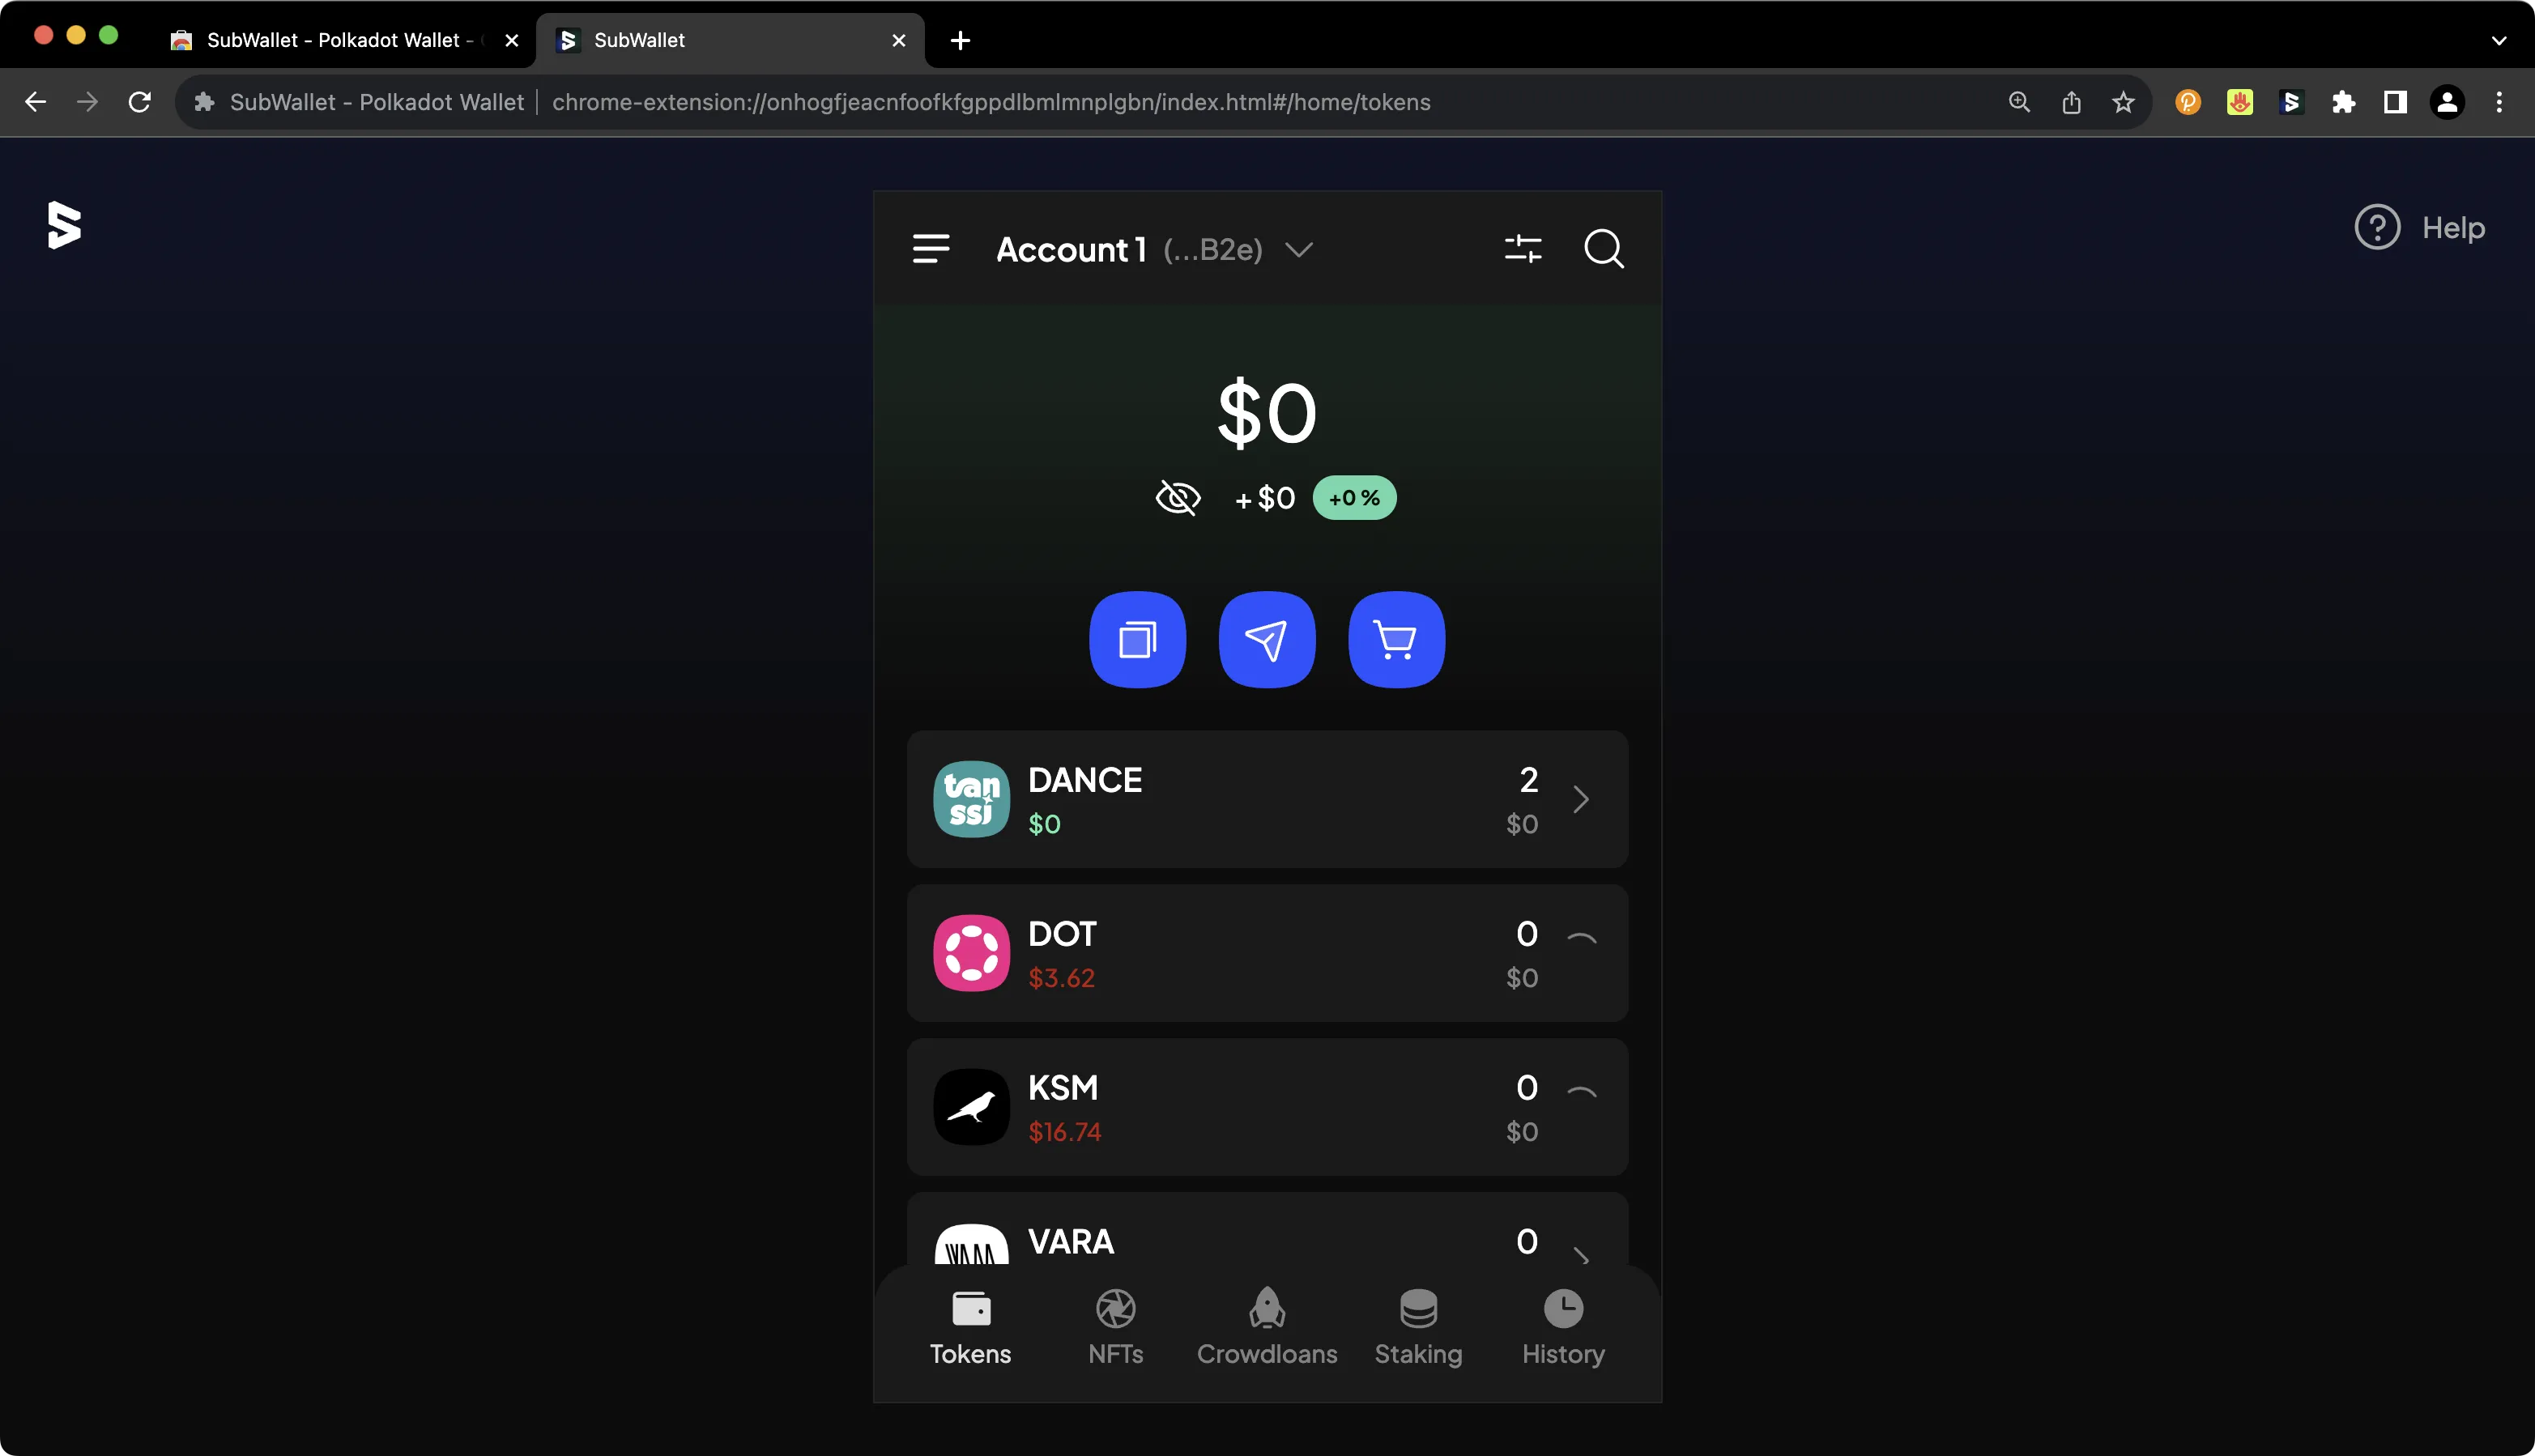 See your TestNet account balances in SubWallet